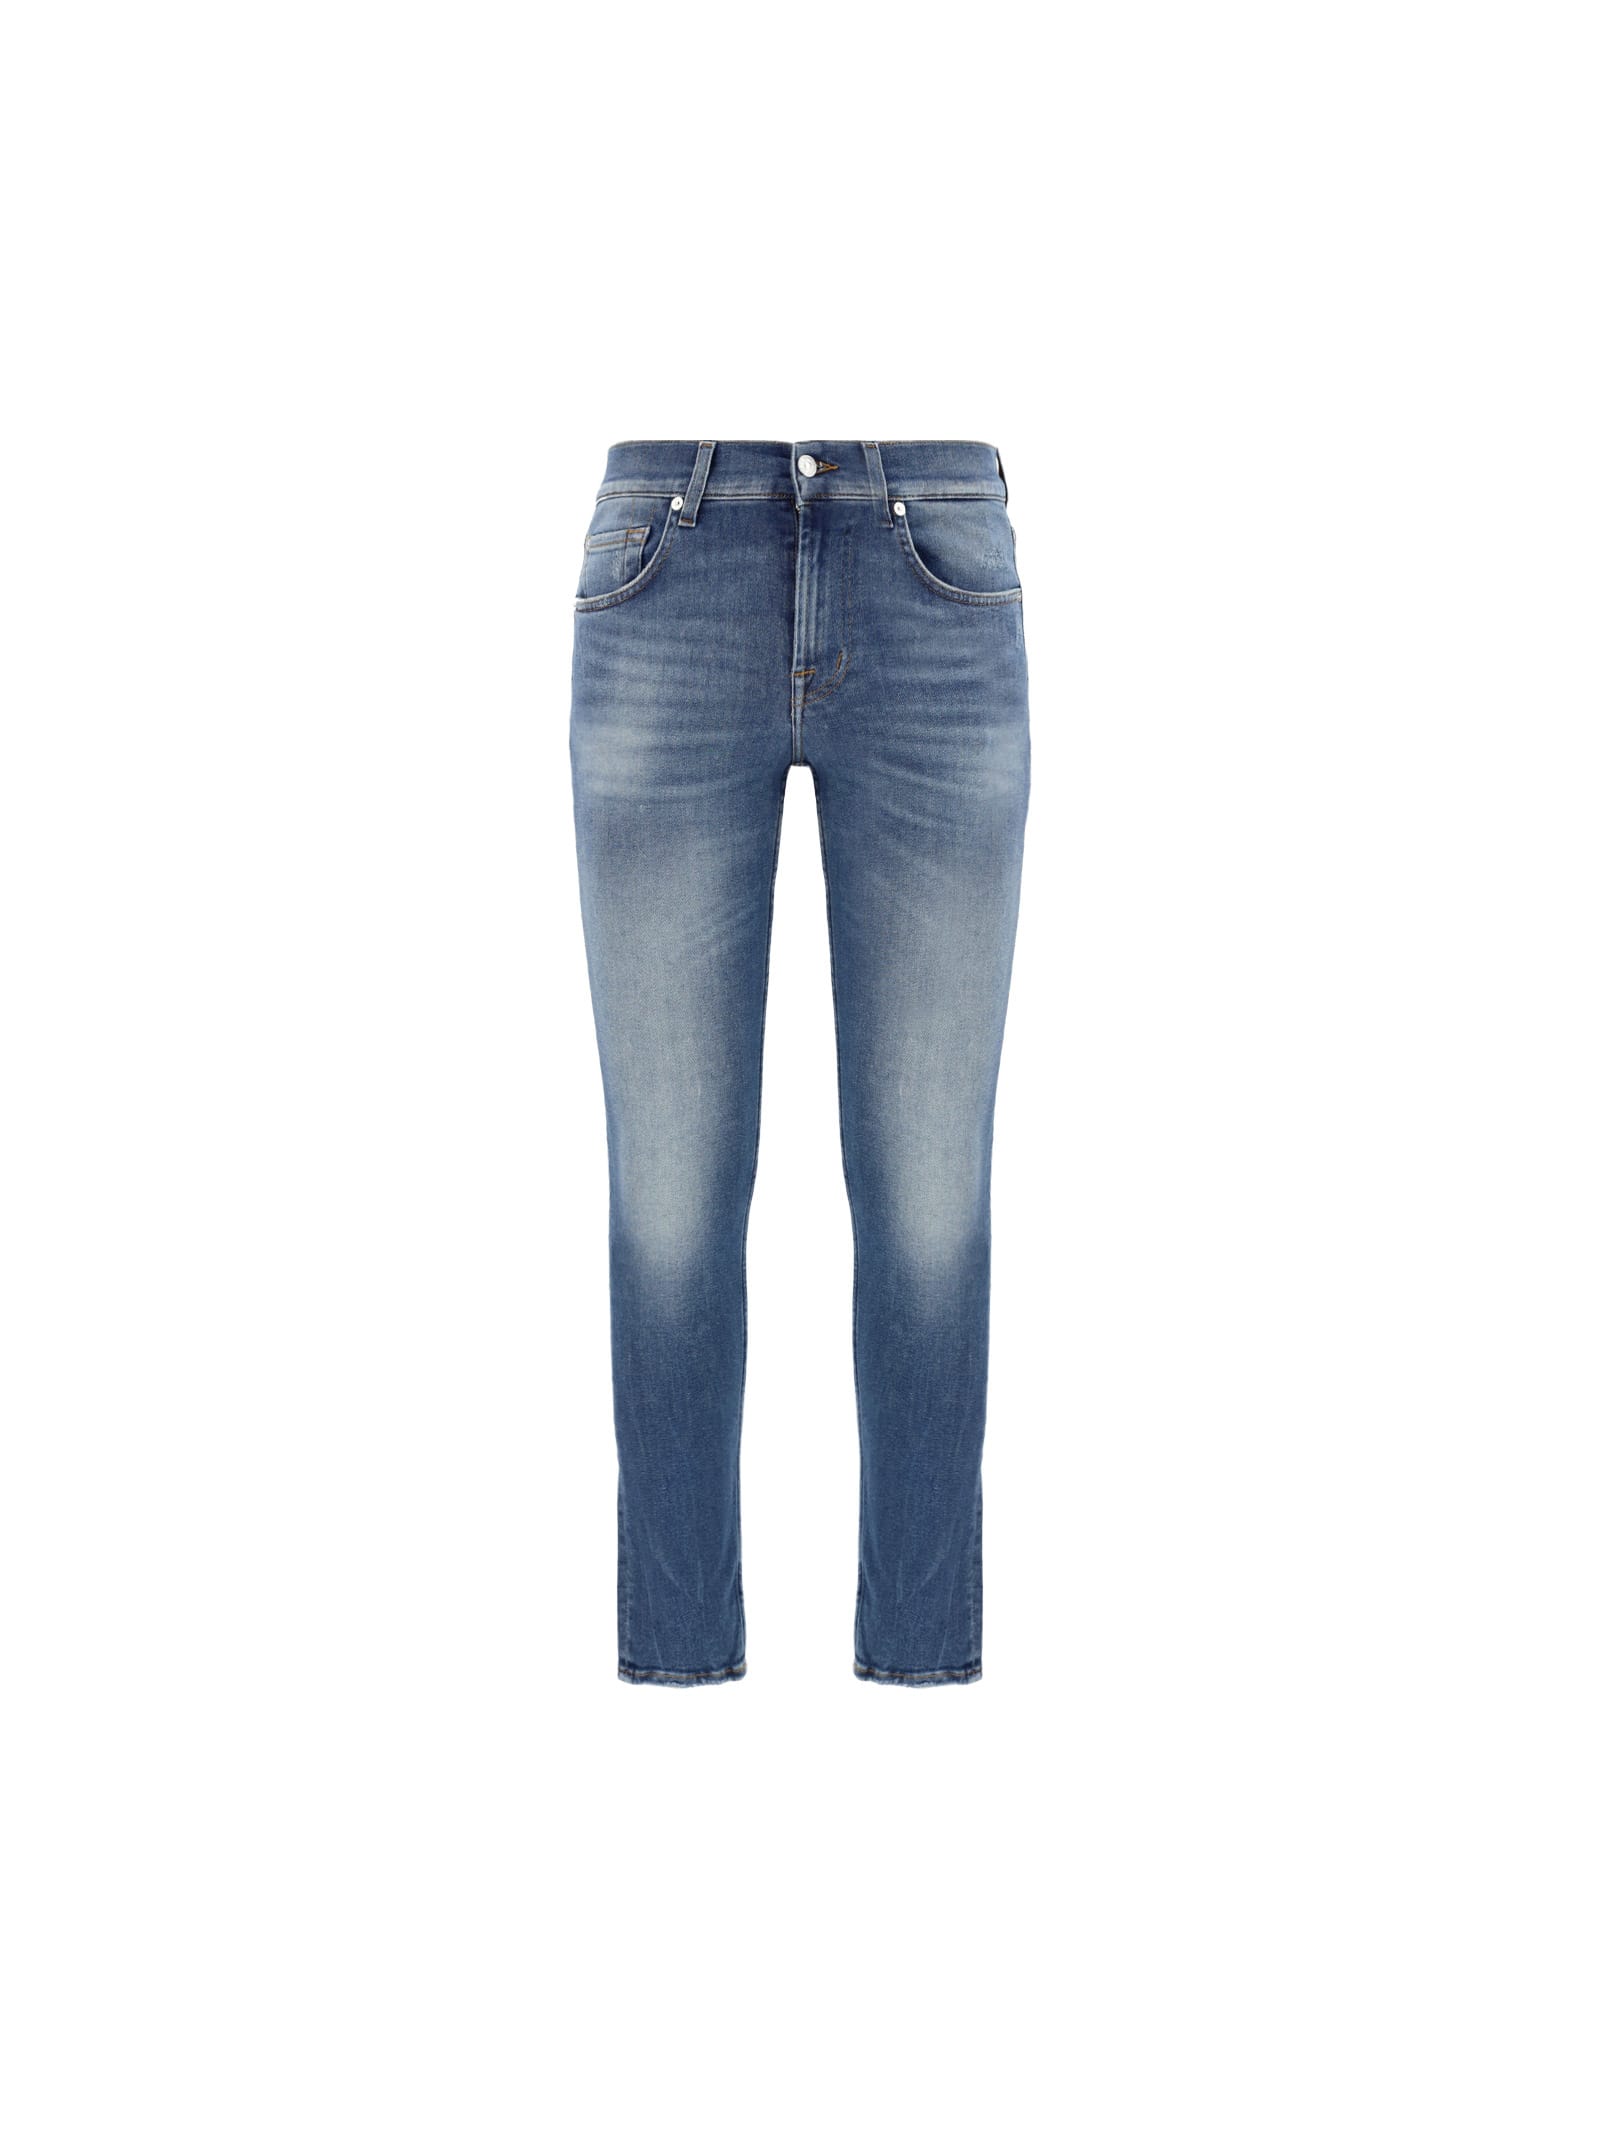 7 For All Mankind 7forallmankind Slim Jeans